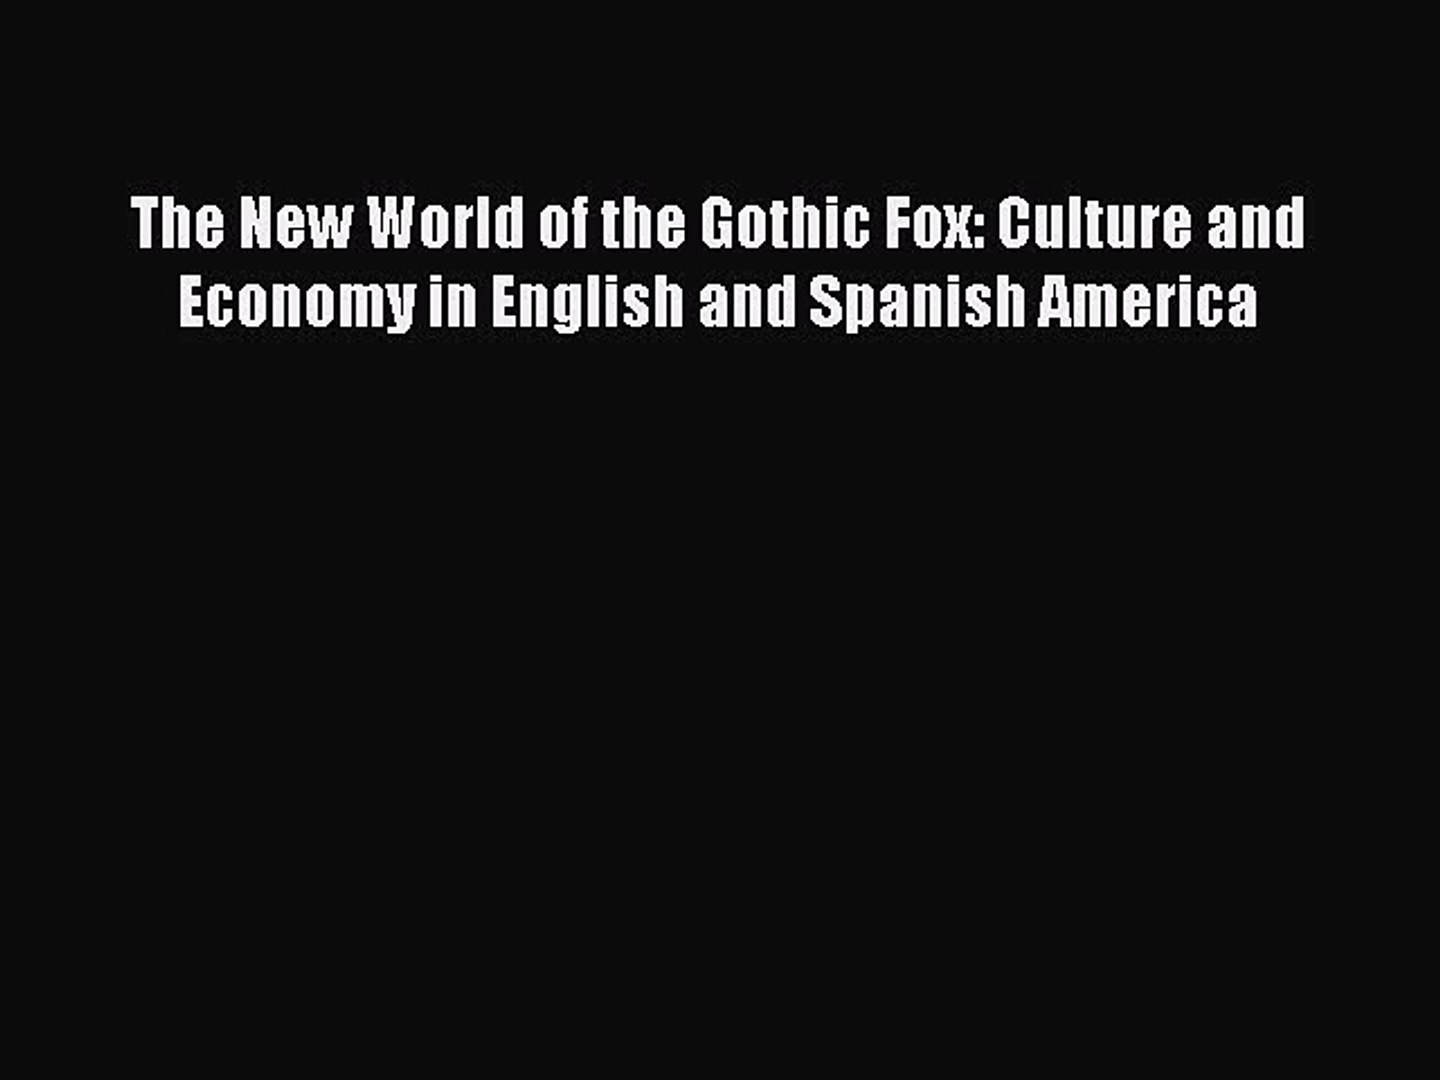 [Read book] The New World of the Gothic Fox: Culture and Economy in English and Spanish America